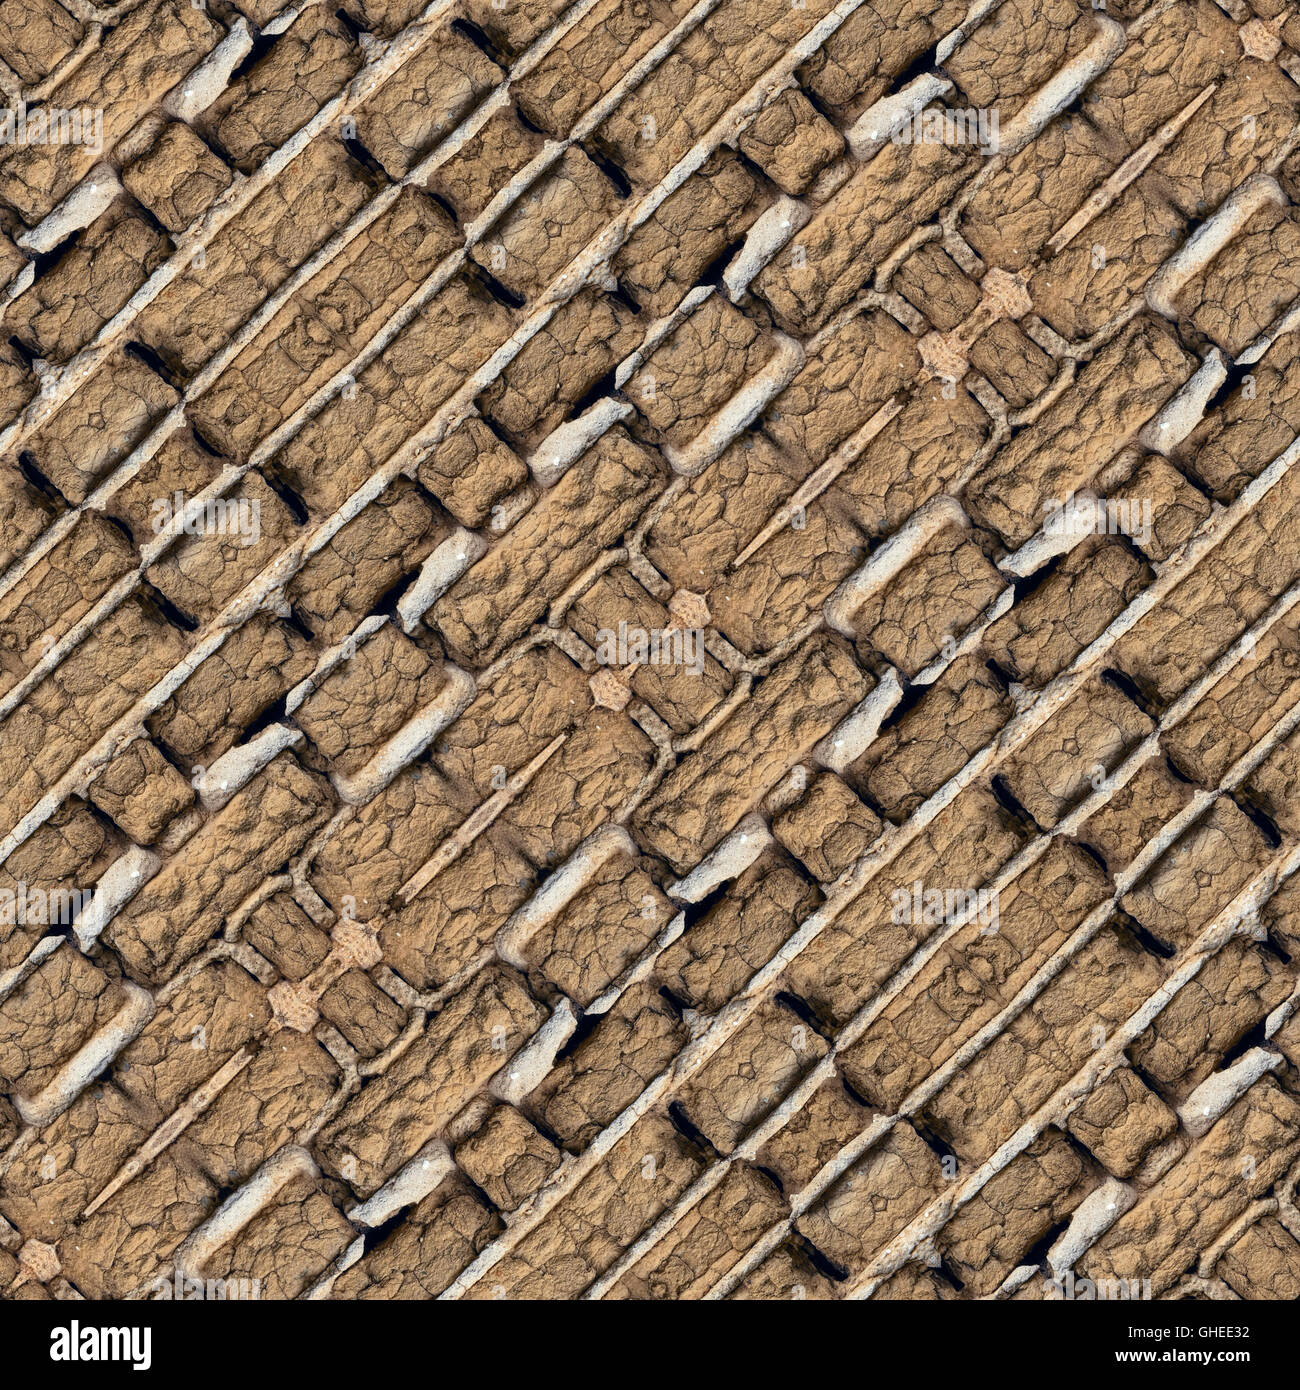 Seamless abstract architecture design for background, wallpaper, print or any use based on rustic wall of raw adobe bricks. Anti Stock Photo